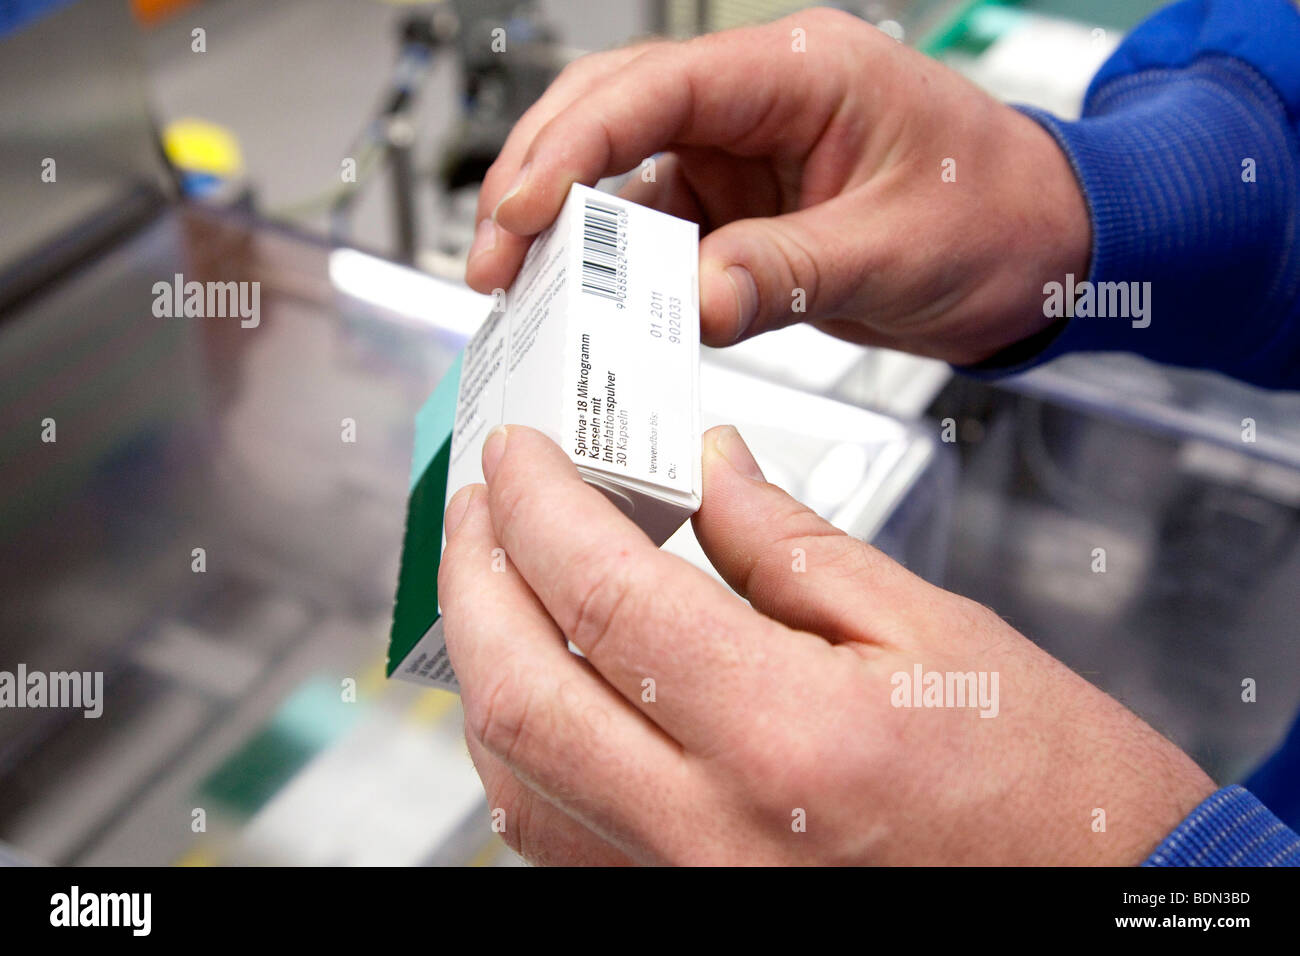 Employee of Boehringer Ingelheim GmbH checking a respiratory drug from a packaging machine in the logistics and packaging cente Stock Photo